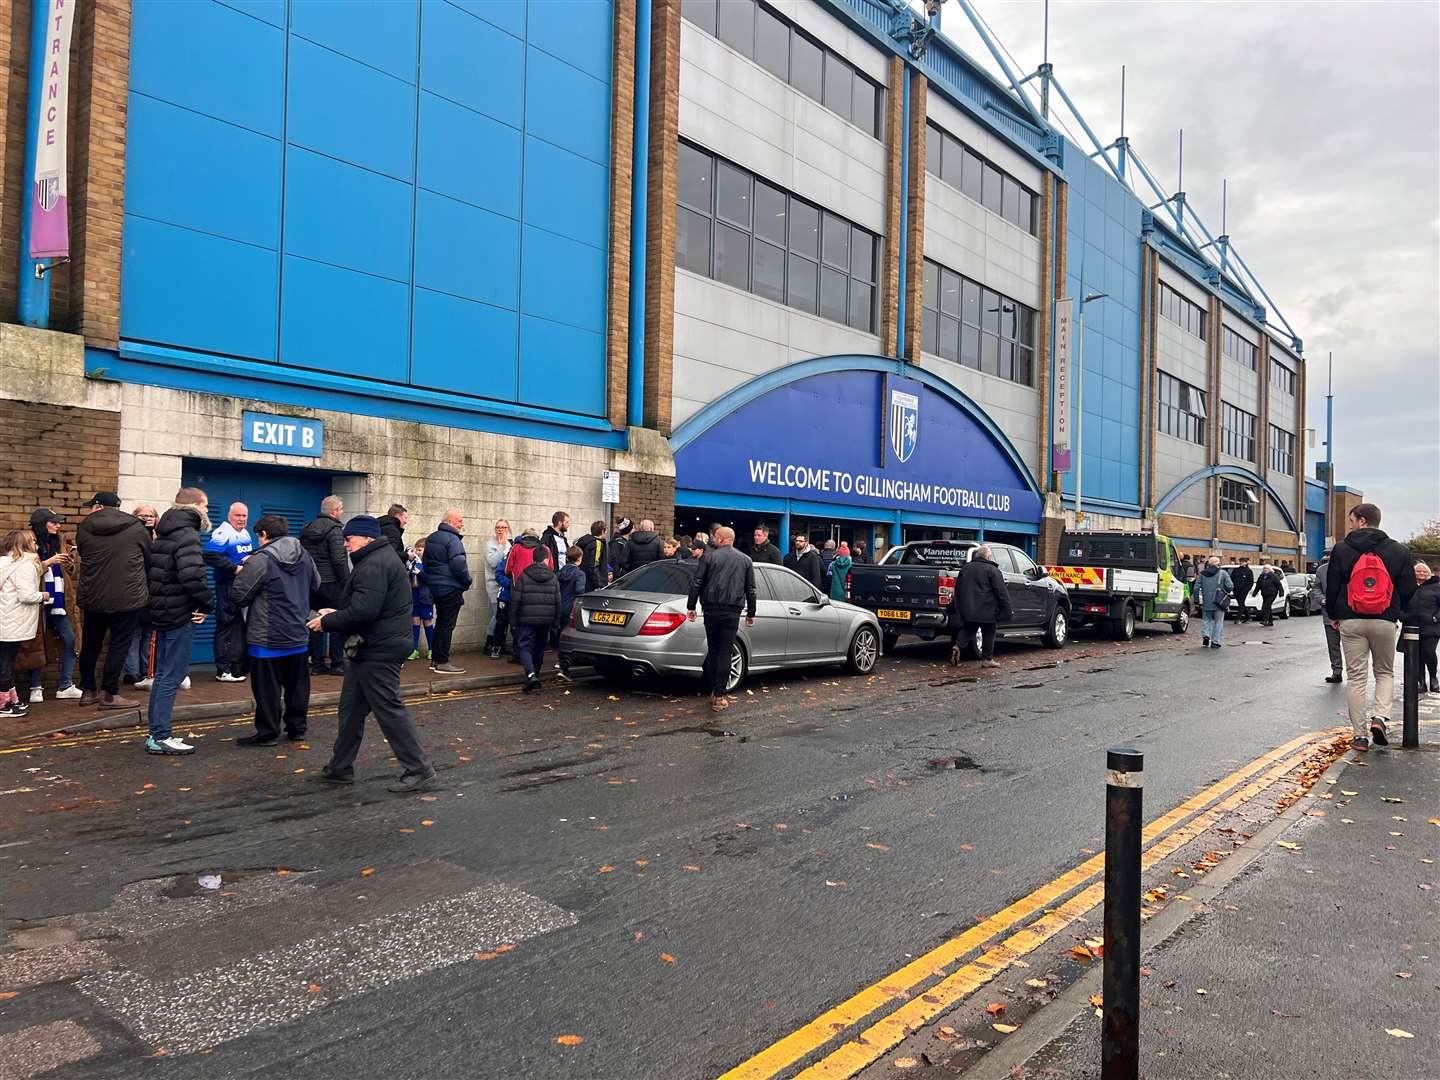 A man has been charged after making an alleged racist gesture at Priestfield Stadium